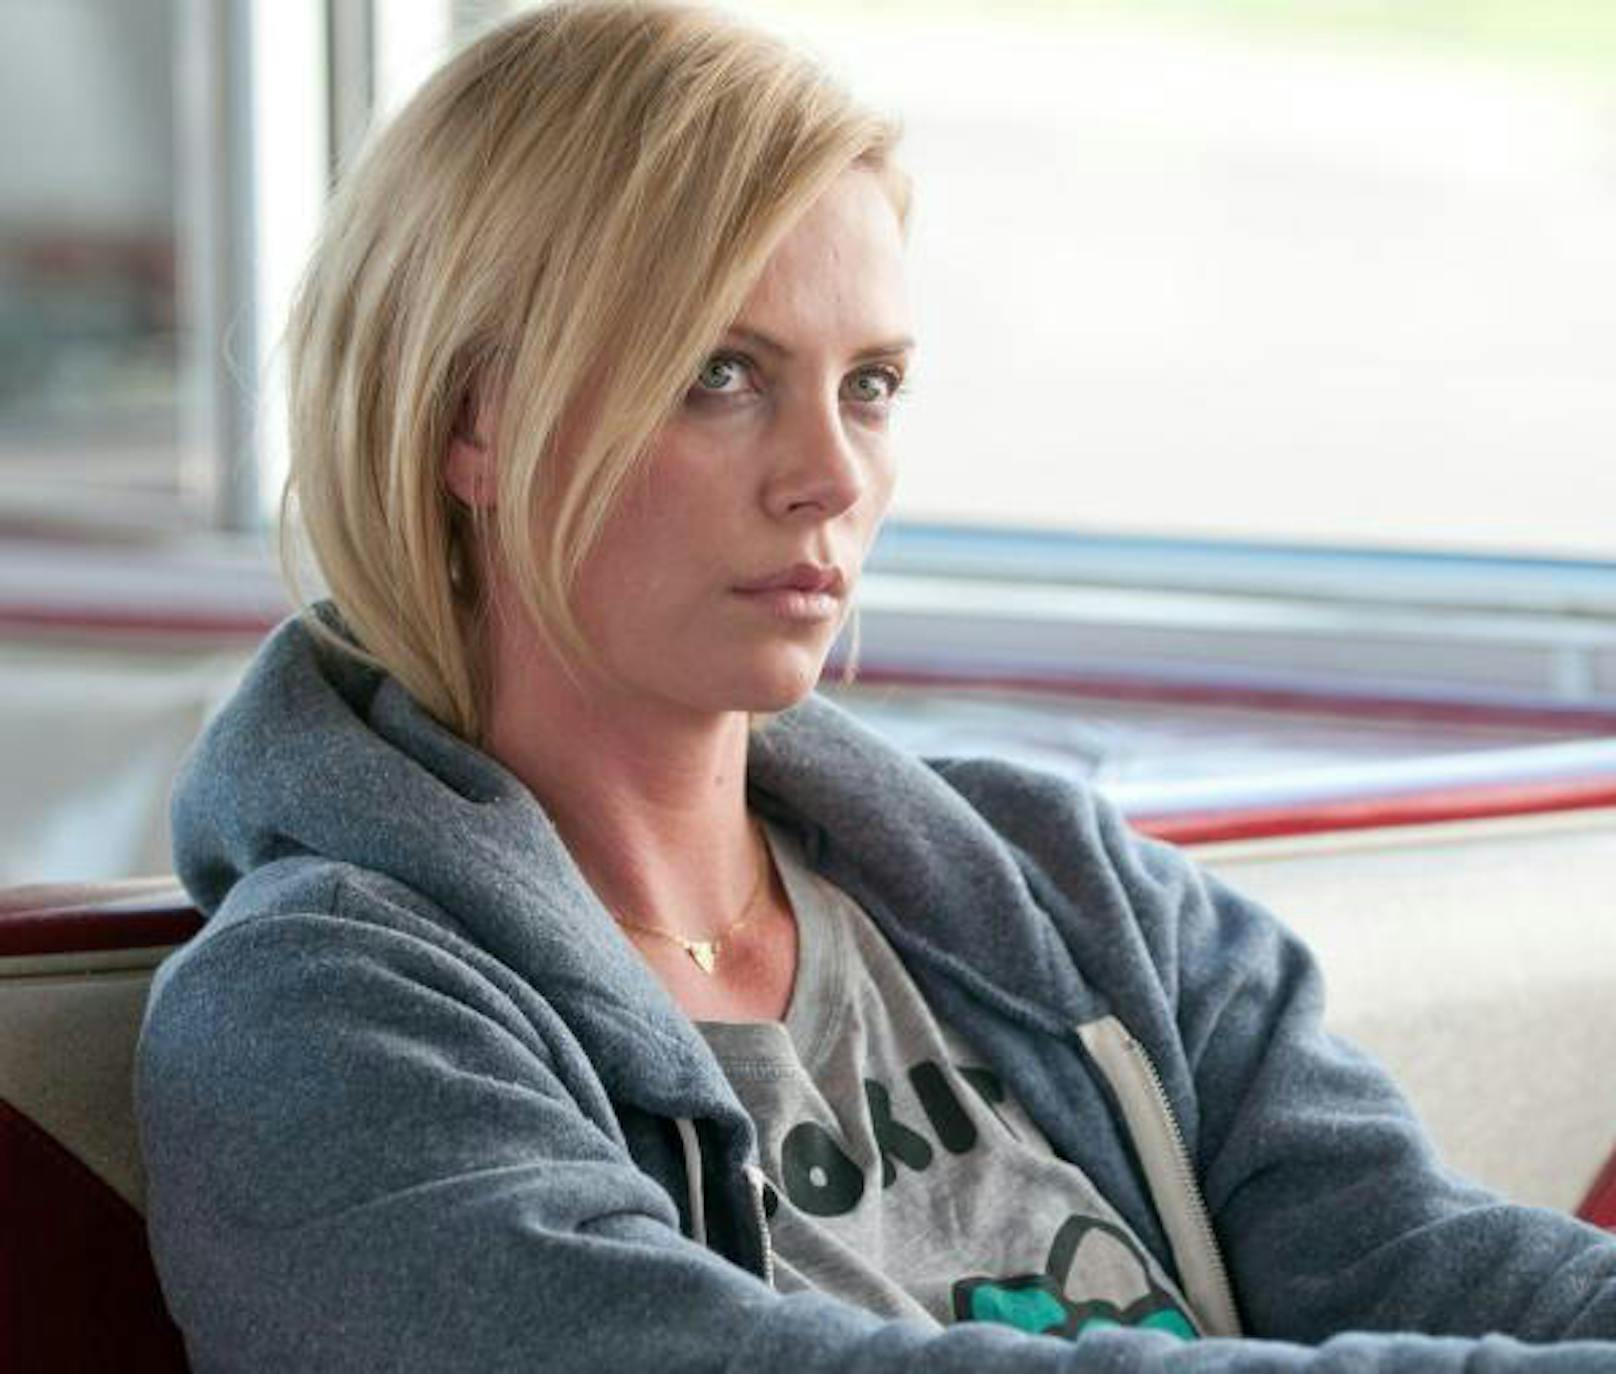 Charlize Theron in "Young Adult"